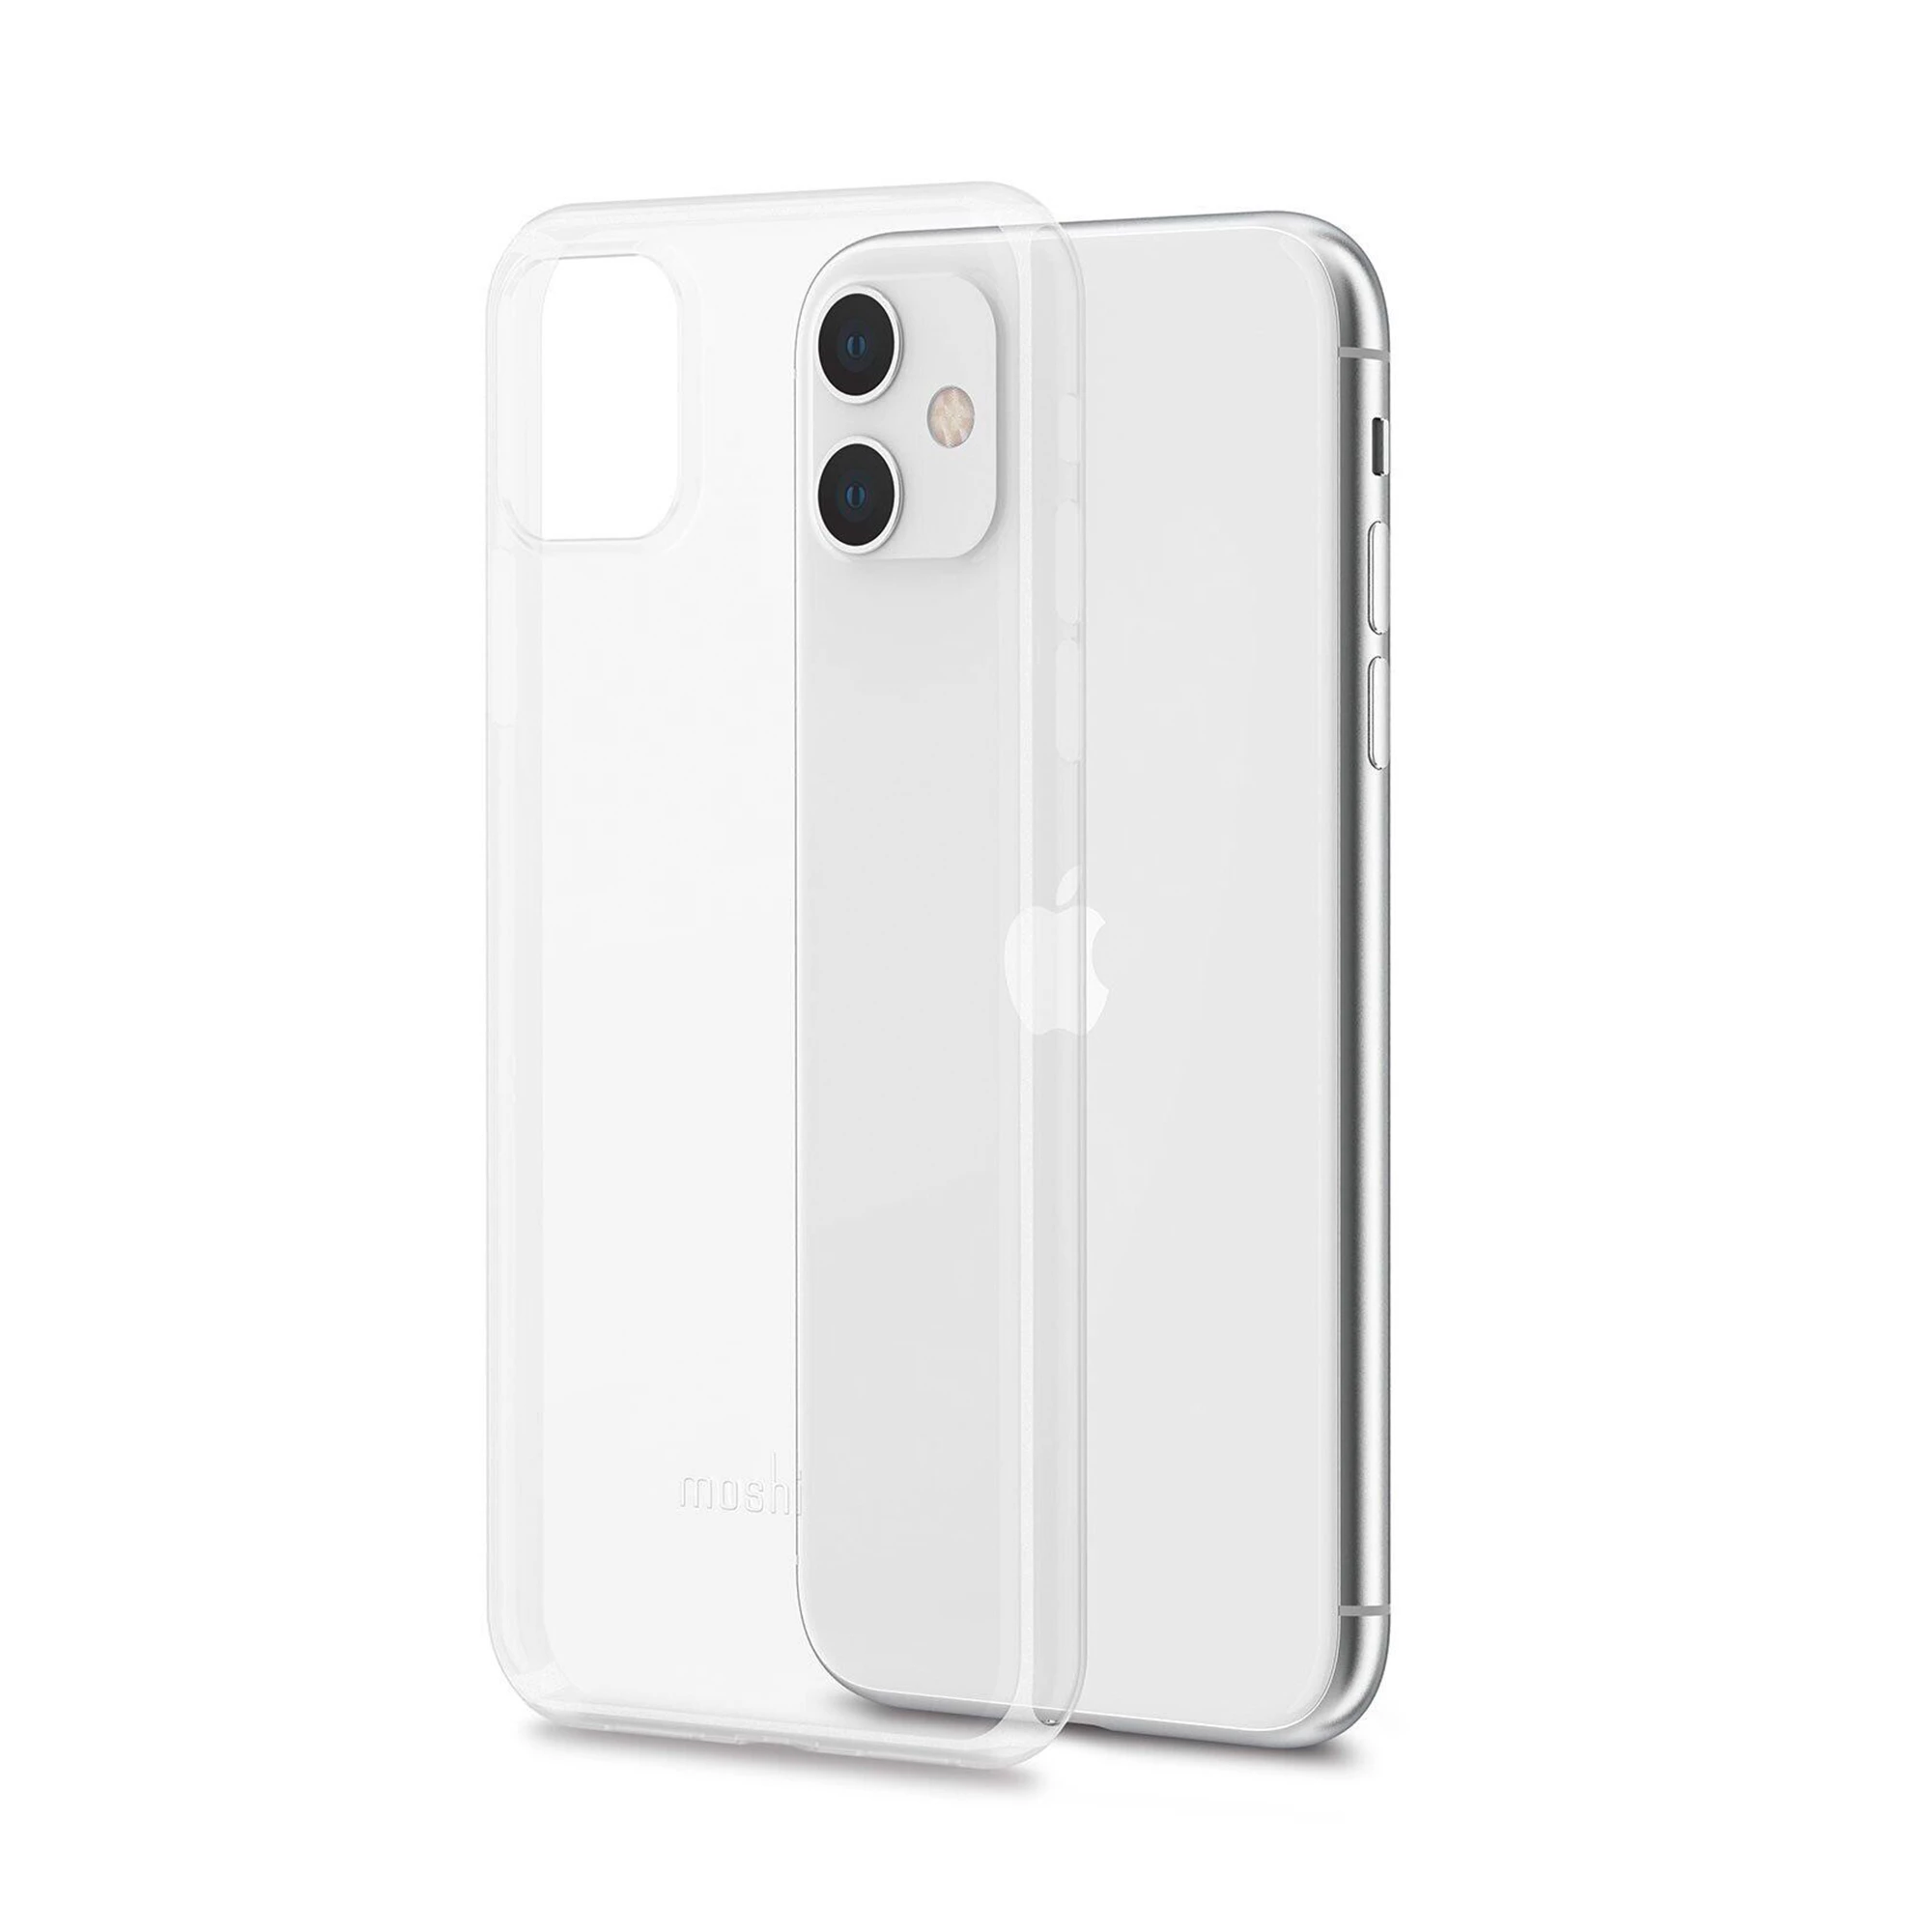 Moshi SuperSkin Ultra Thin Case Crystal for iPhone 11 Clear (99MO111909)